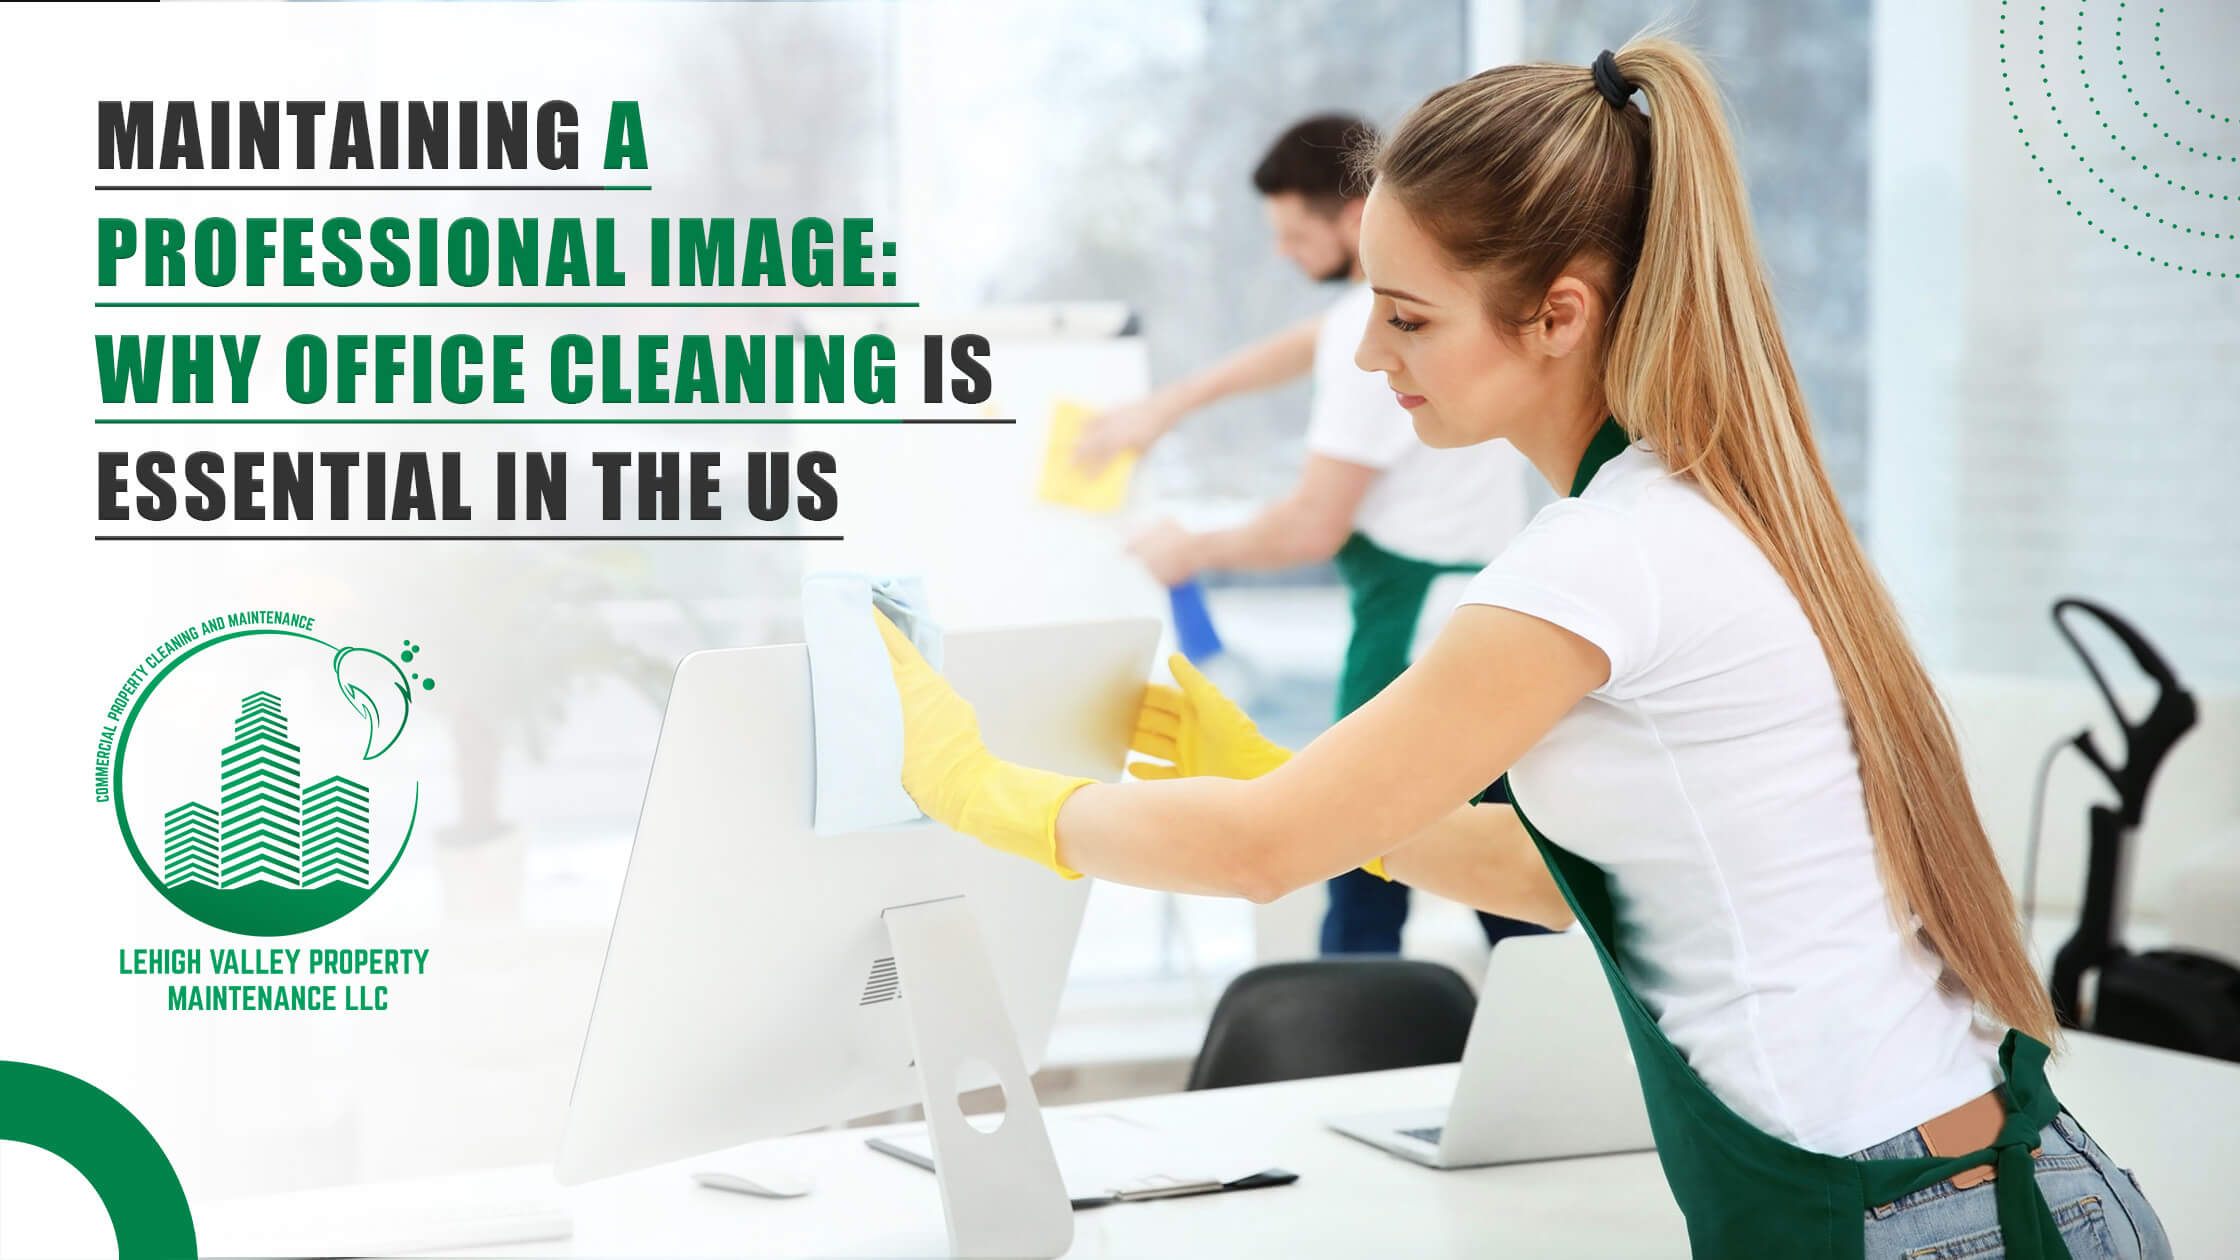 You are currently viewing Maintaining a Professional Image: Why Office Cleaning is Essential in the US